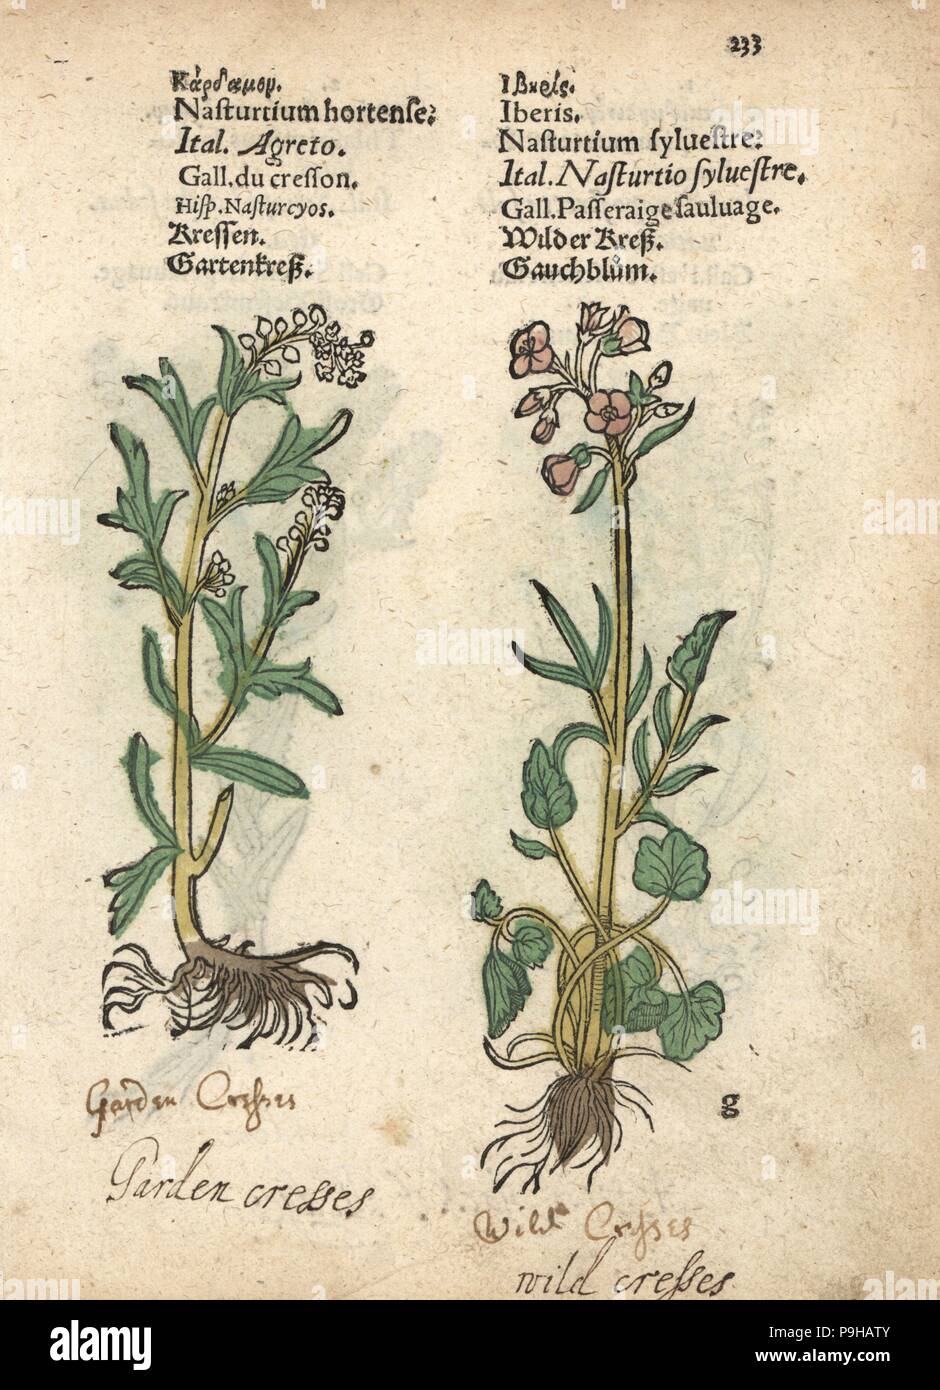 Garden cress, Lepidium sativum, and creeping yellowcress, Rorippa sylvestris. Handcoloured woodblock engraving of a botanical illustration from Adam Lonicer's Krauterbuch, or Herbal, Frankfurt, 1557. This from a 17th century pirate edition or atlas of illustrations only, with captions in Latin, Greek, French, Italian, German, and in English manuscript. Stock Photo